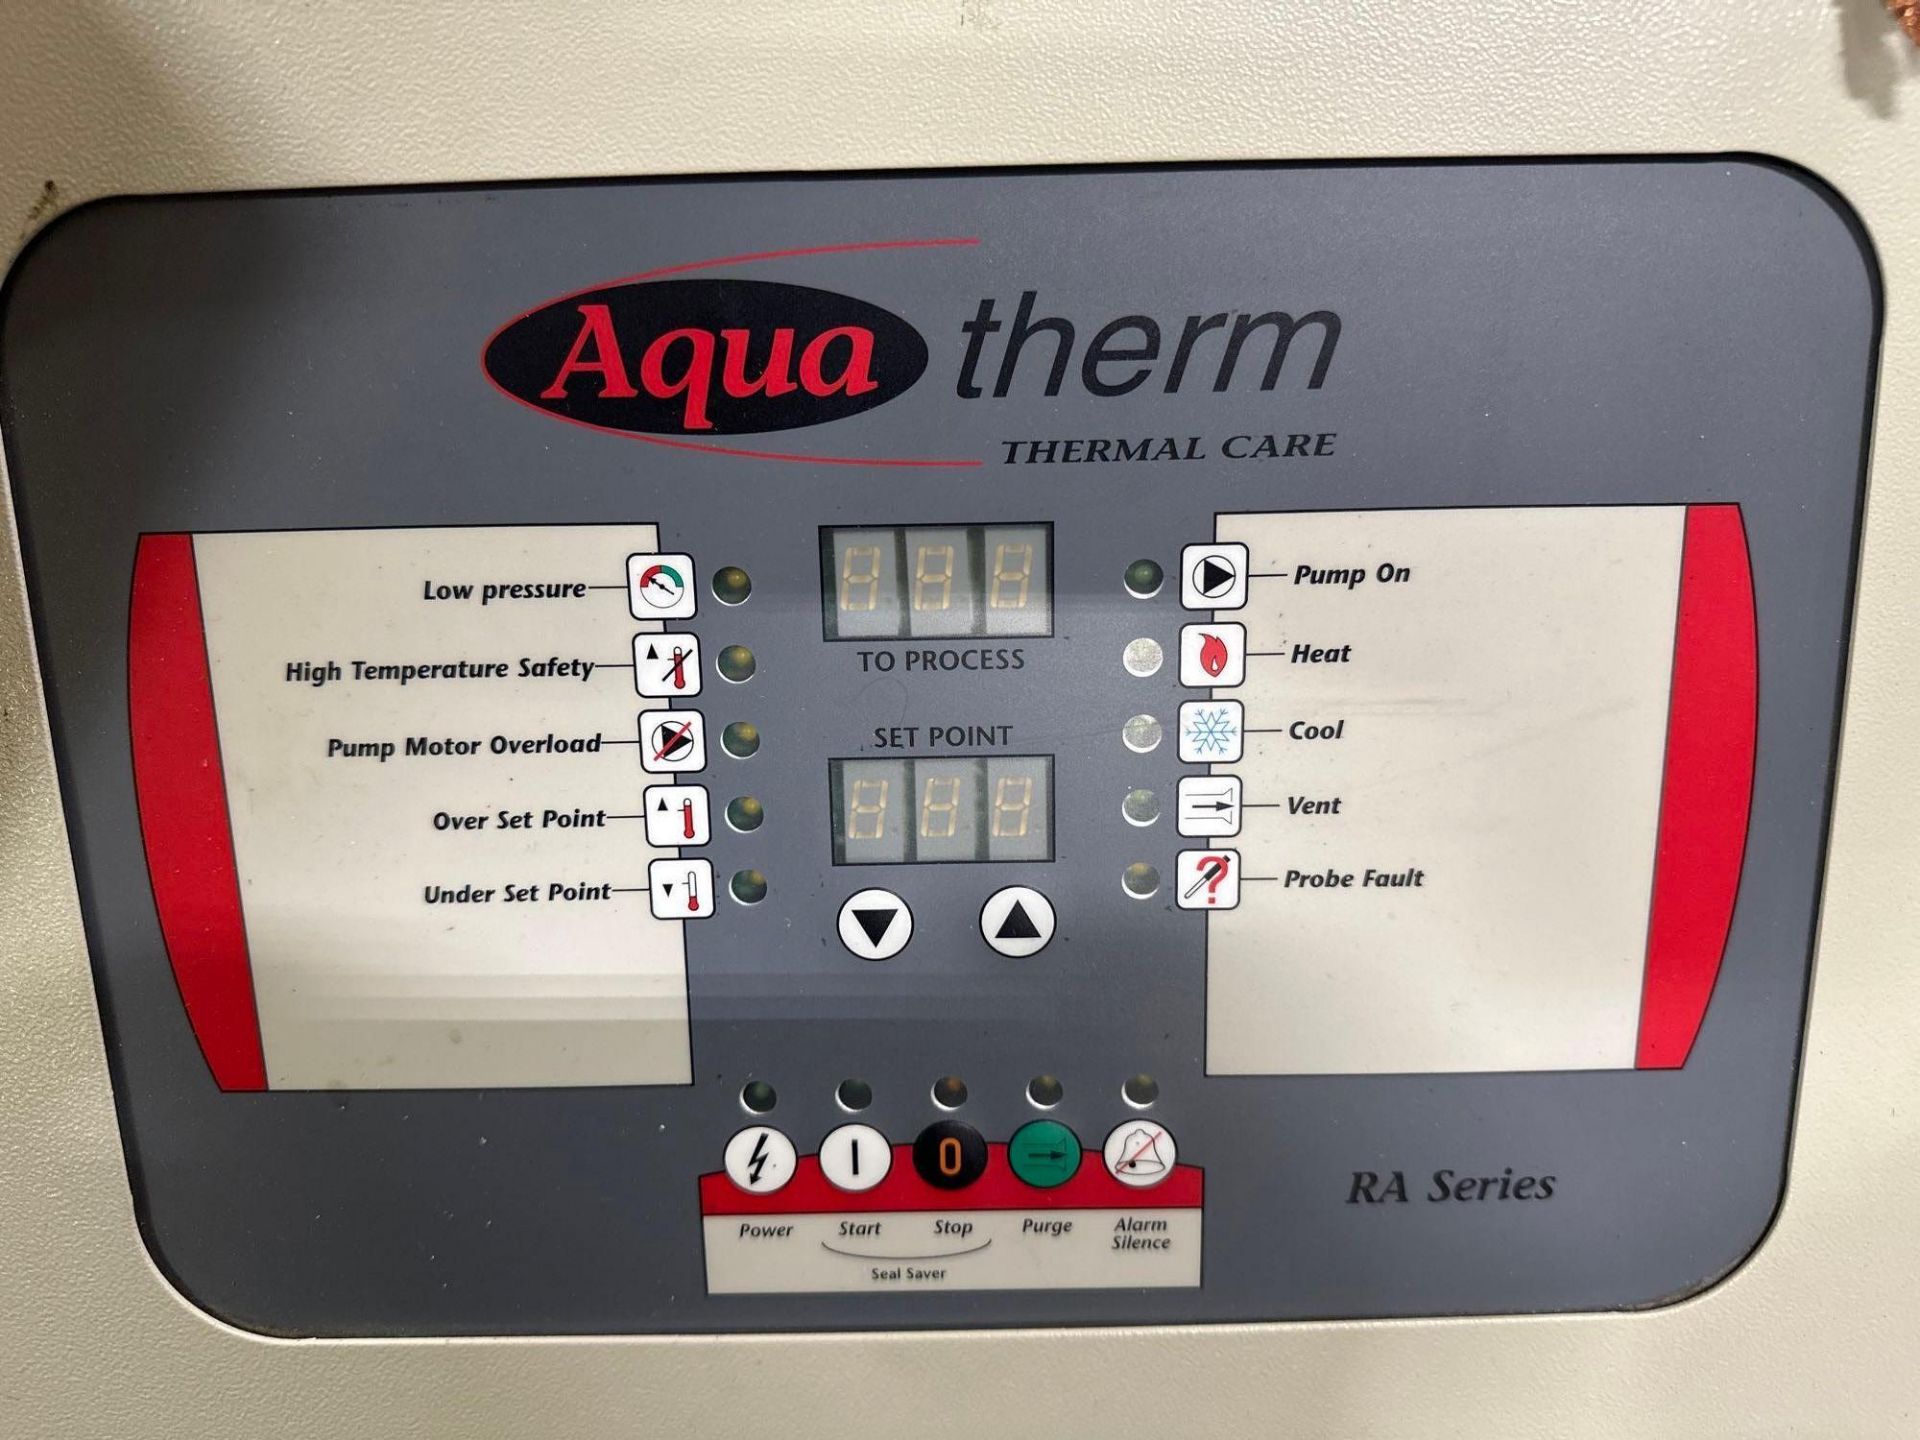 Aqua Therm Thermal Care RA090803 Thermolator, 30gpm, 19psi, s/n I4316080705 - Image 2 of 4